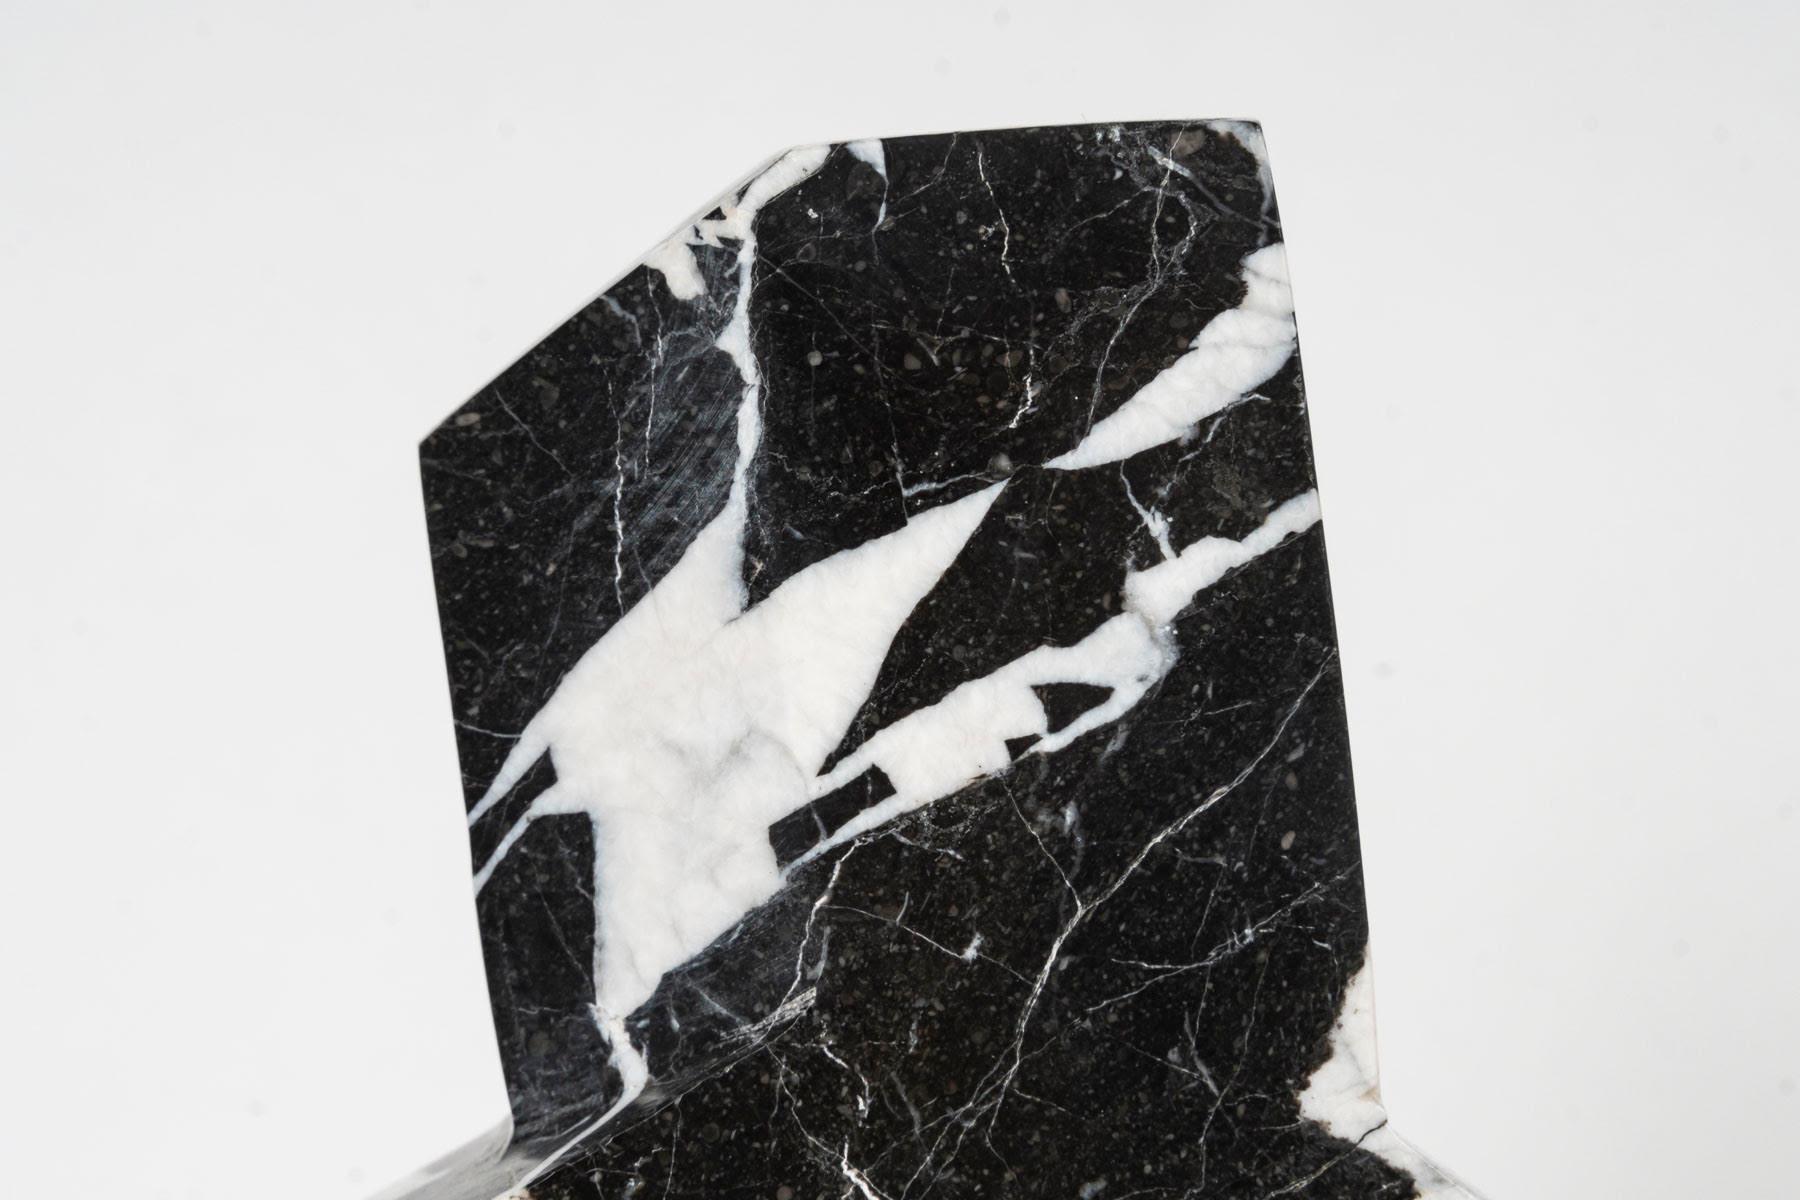 French Marble Sculpture by François Fernandez, known as SAVY, Signed and Dated 2001. For Sale